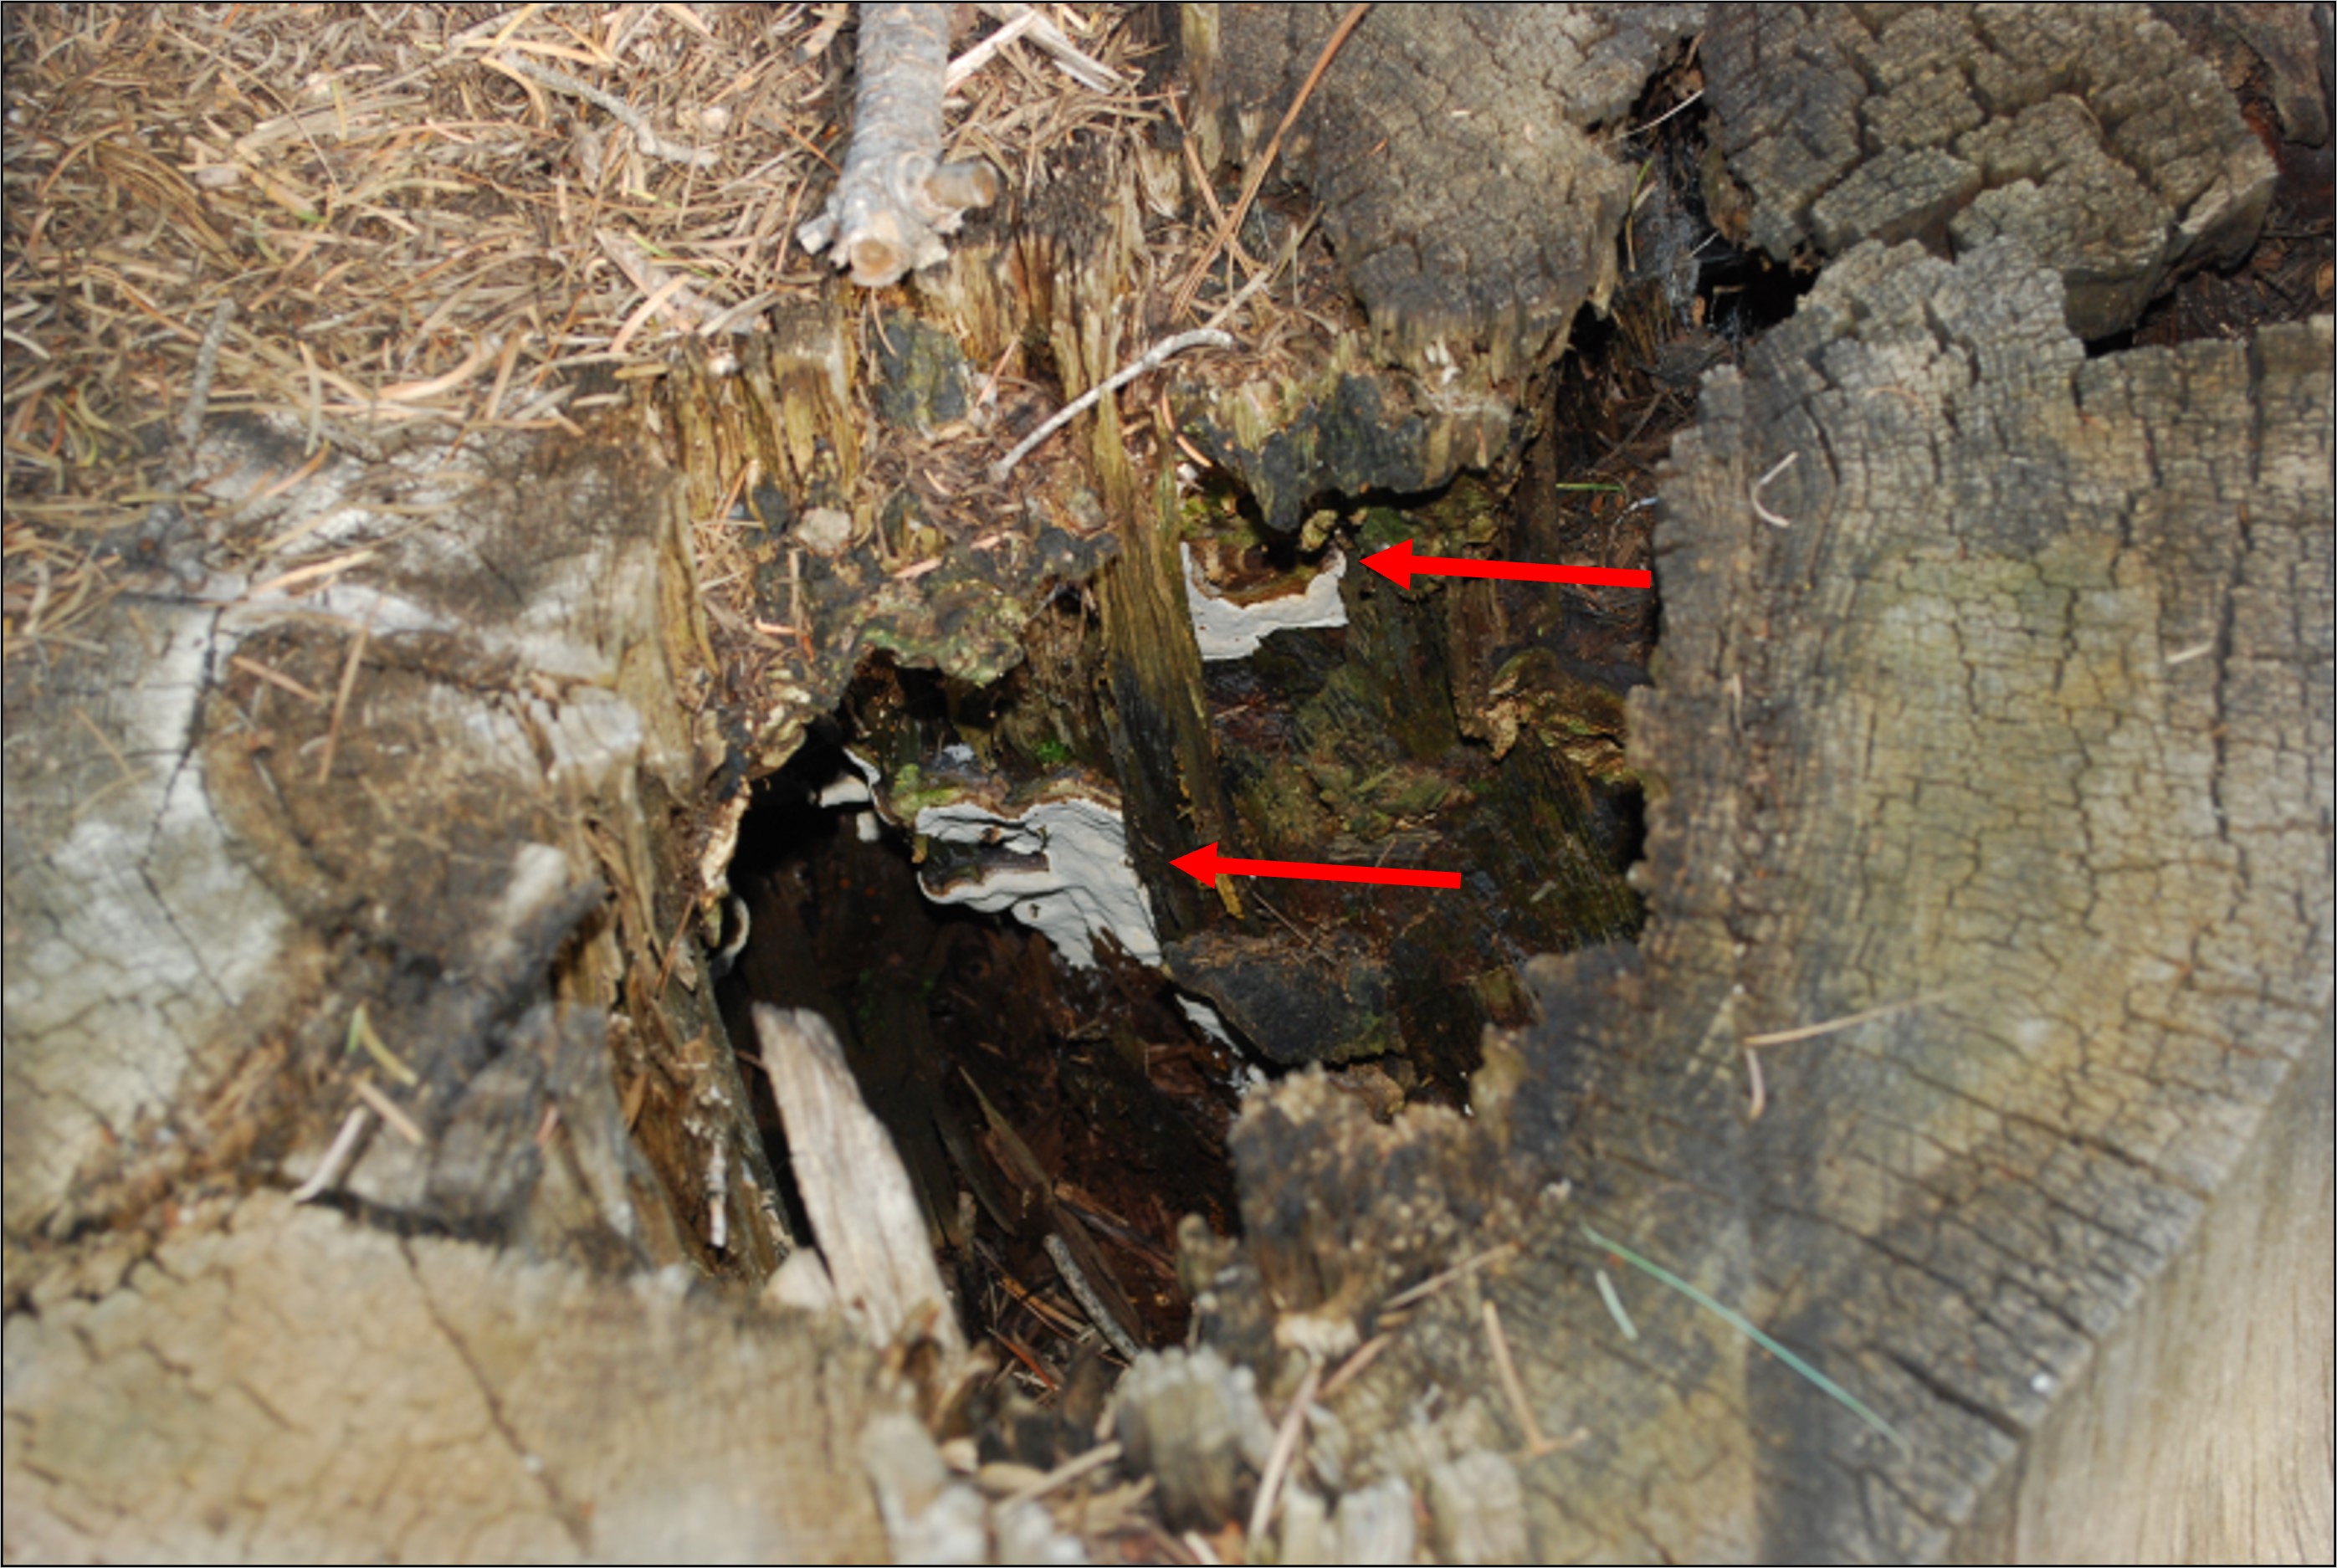 Root disease killed saplings associated with stumps.